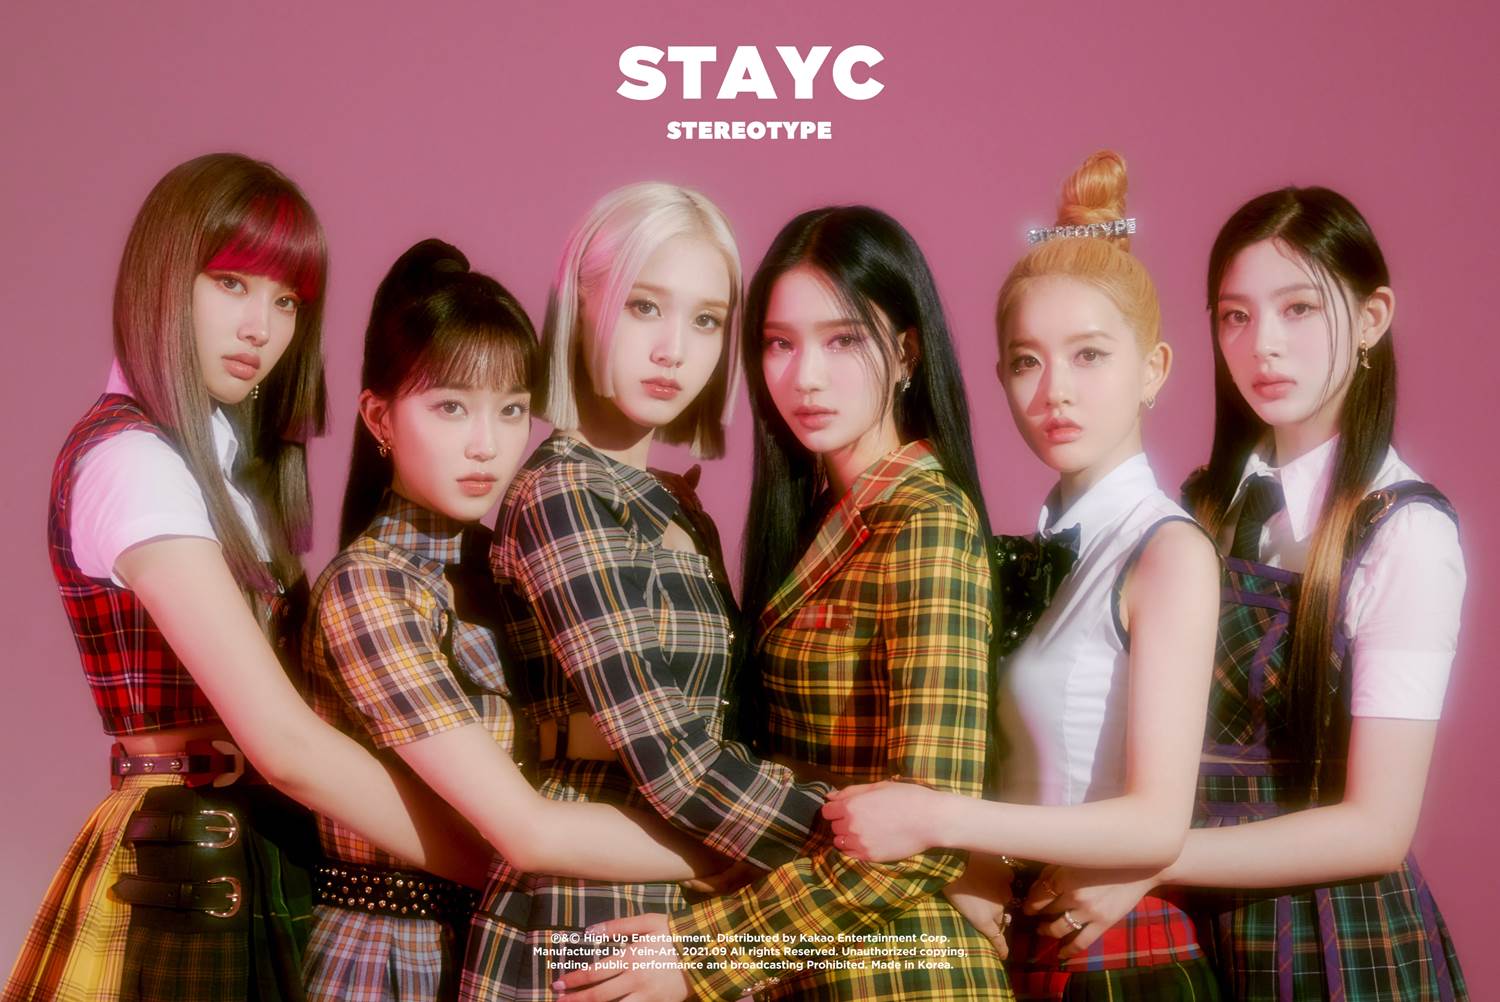 STAYC lanza su 1er EP ‘STEREOTYPE’